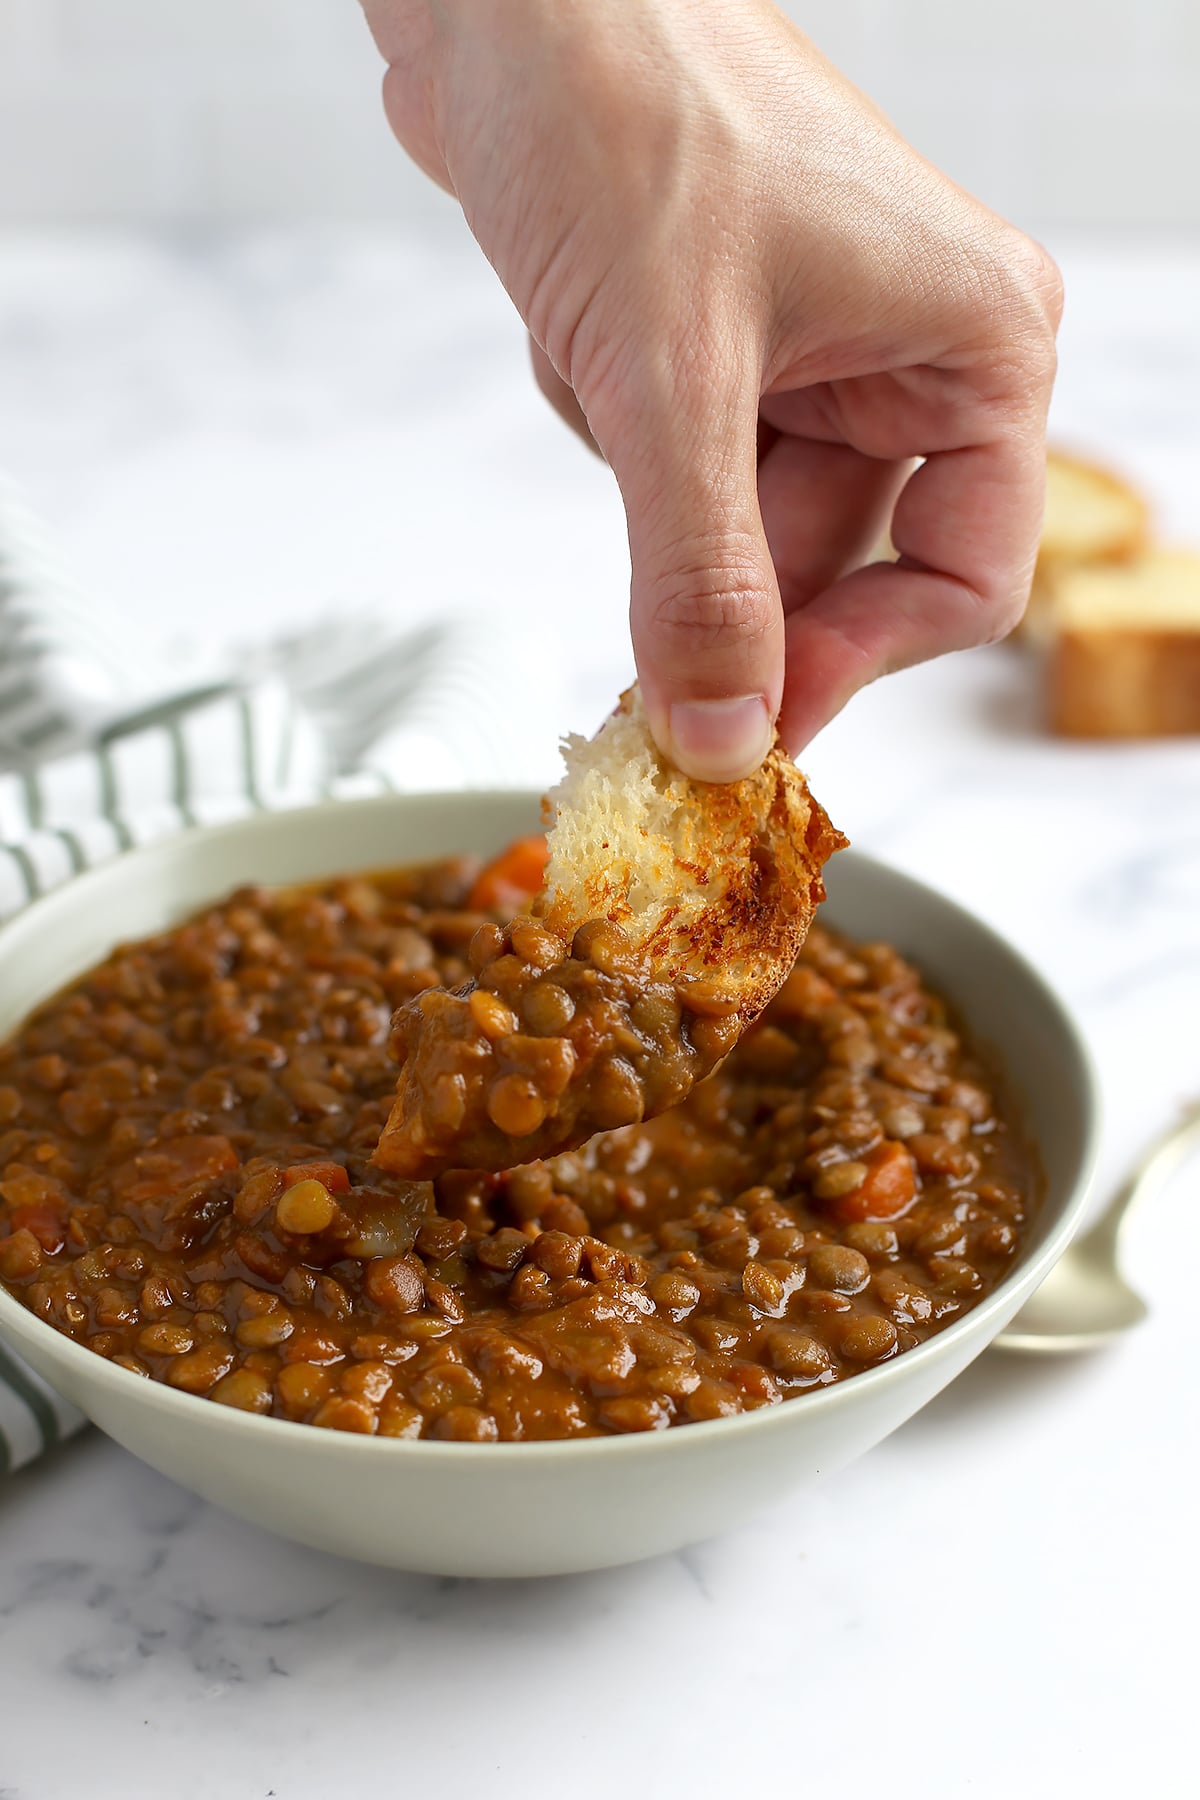 Someone dunking a crust of toasted bread into a bowl of hearty lentil soup.